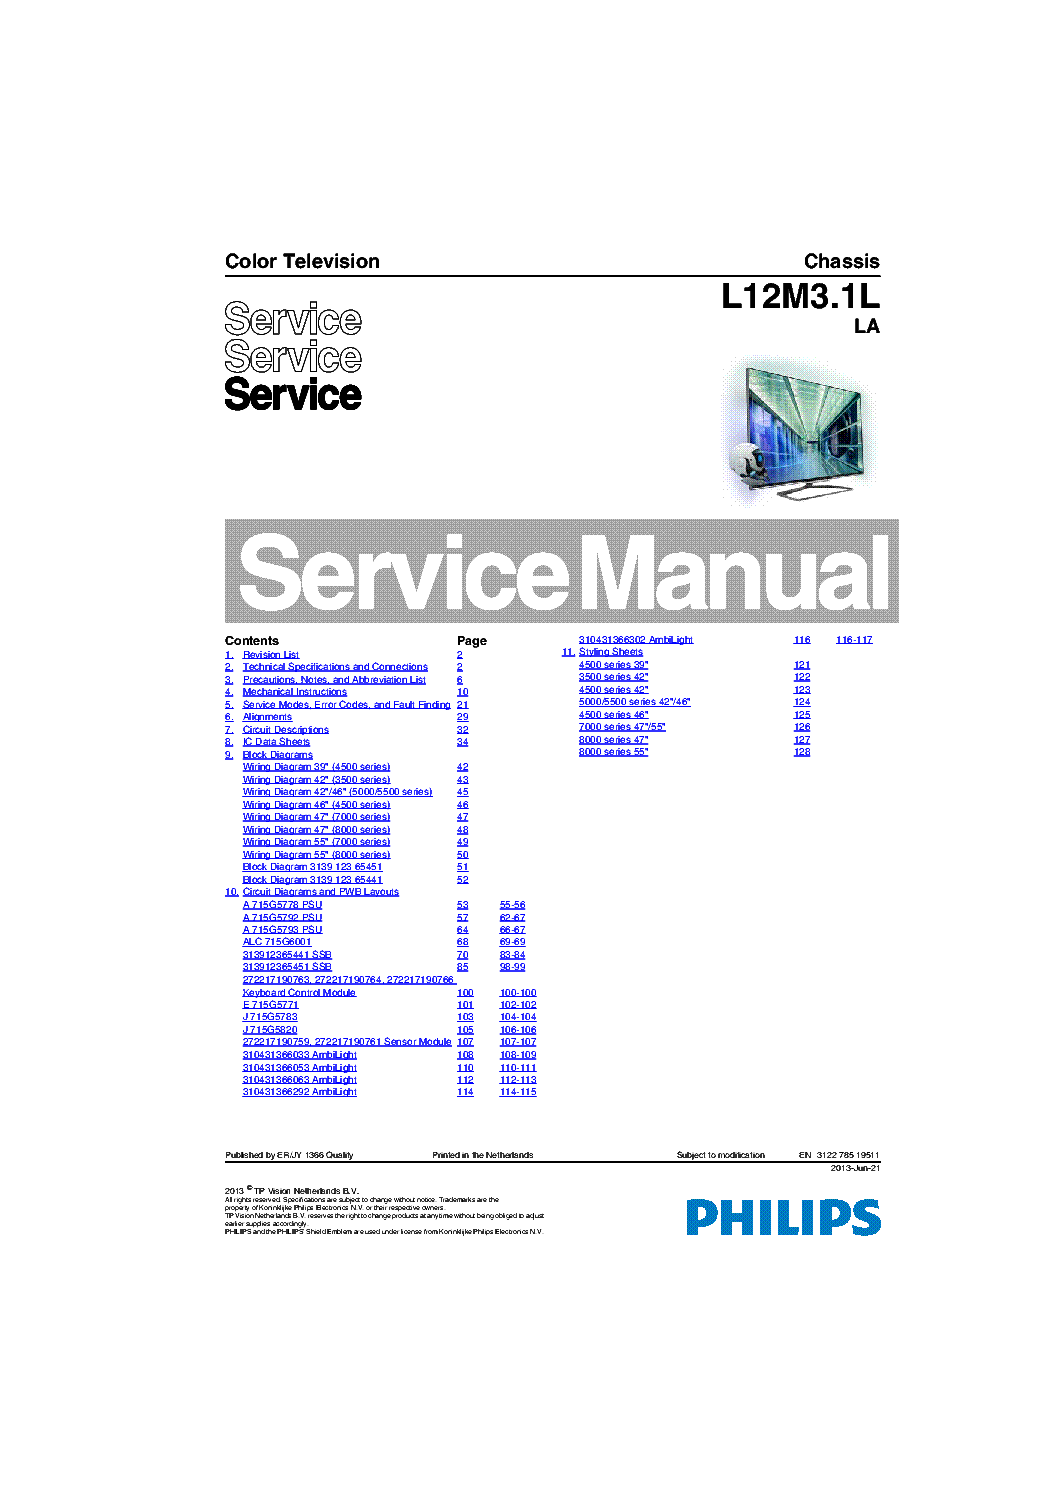 PHILIPS 46PFL5508G CHASSIS L12M3.1L SM service manual (1st page)